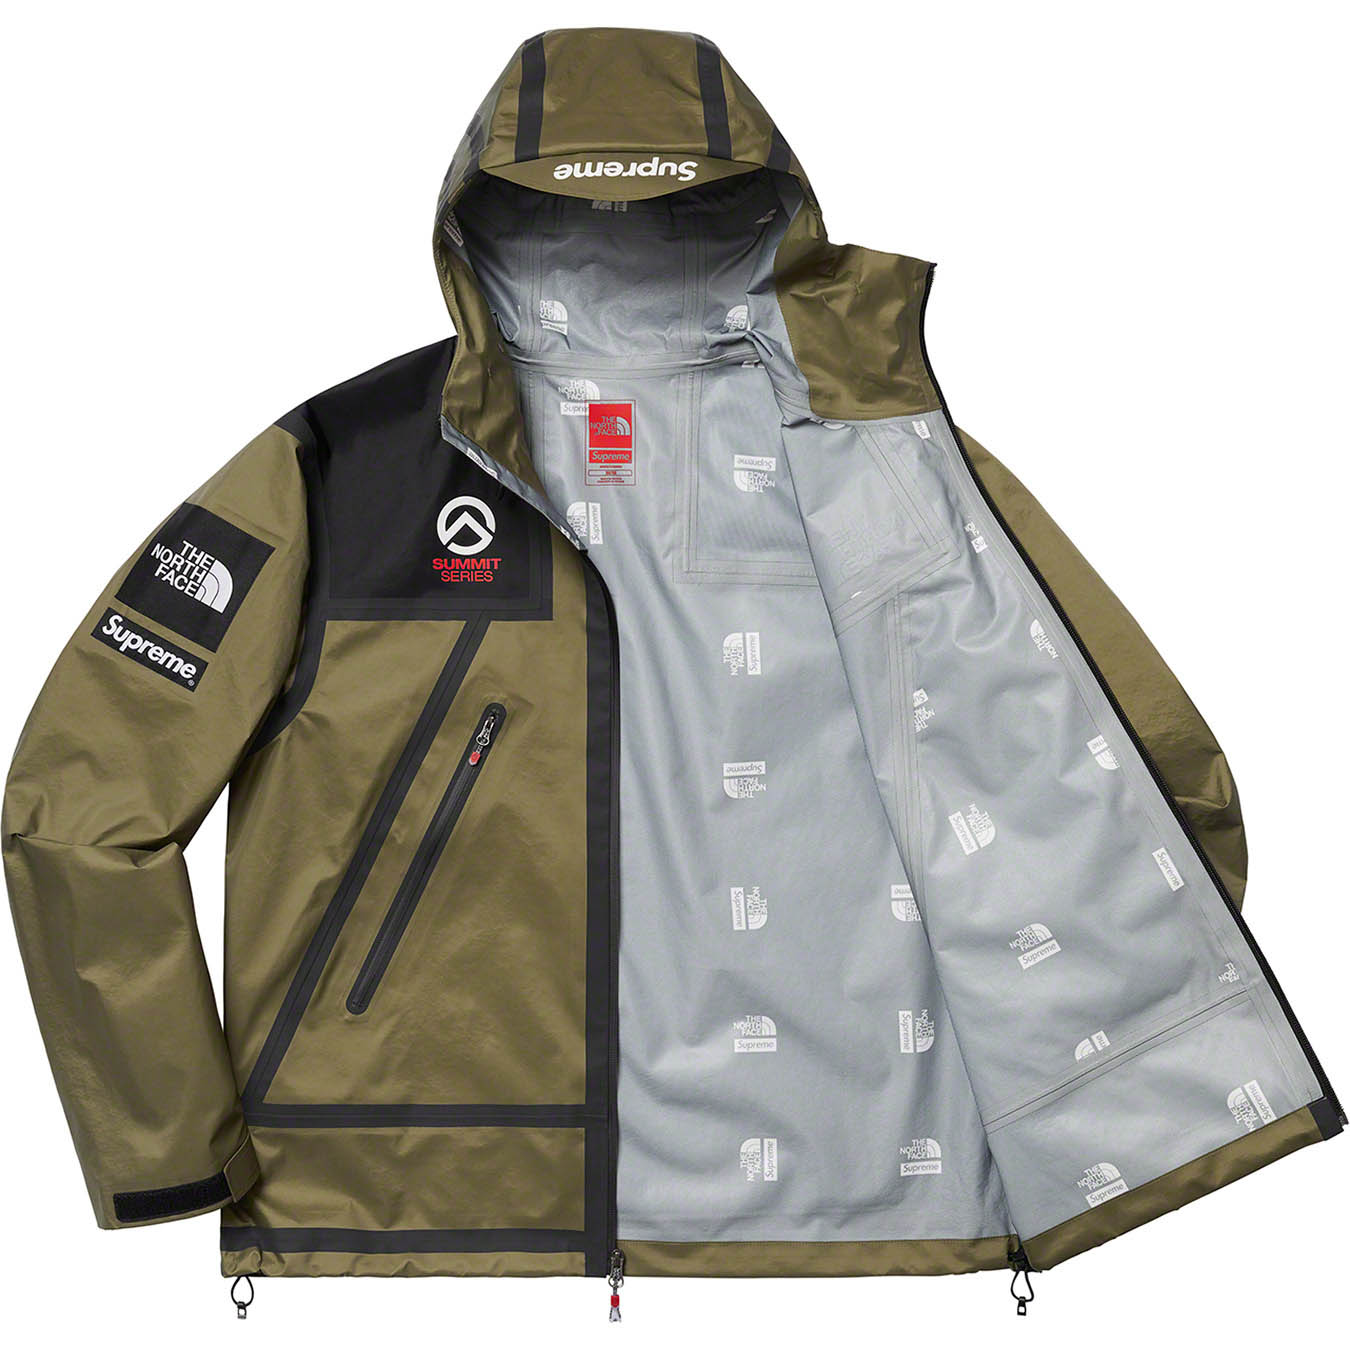 Supreme®/The North Face® Summit Series Outer Tape Seam Jacket | Supreme